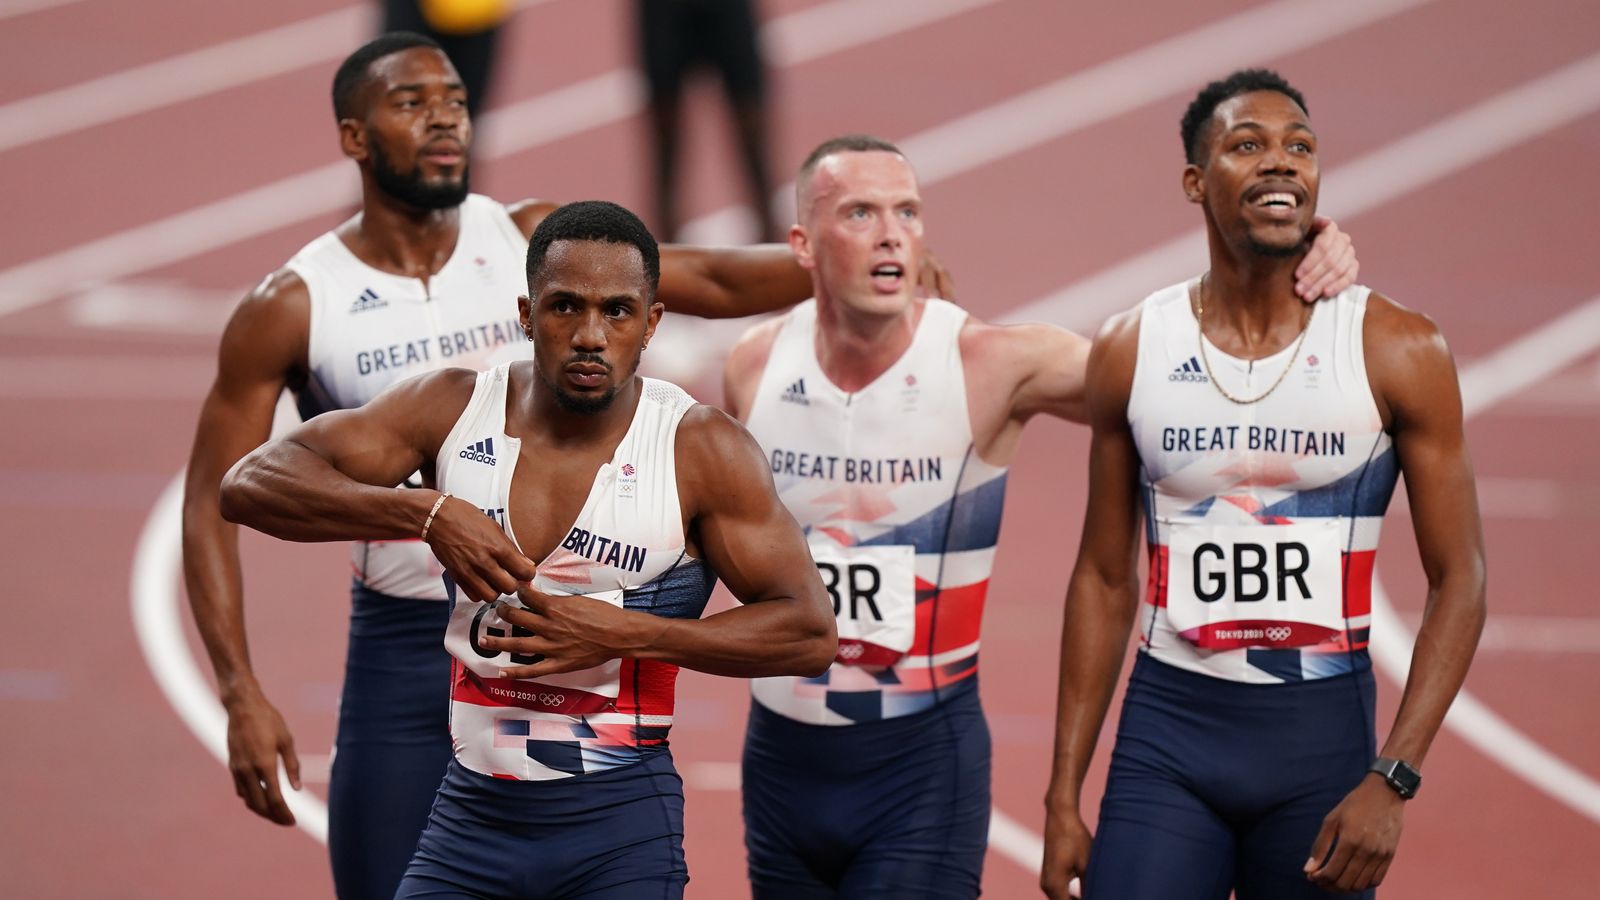 amazon, sprinter back in gb relay squad after drugs ban - along with athlete who said he'd 'never forgive' him